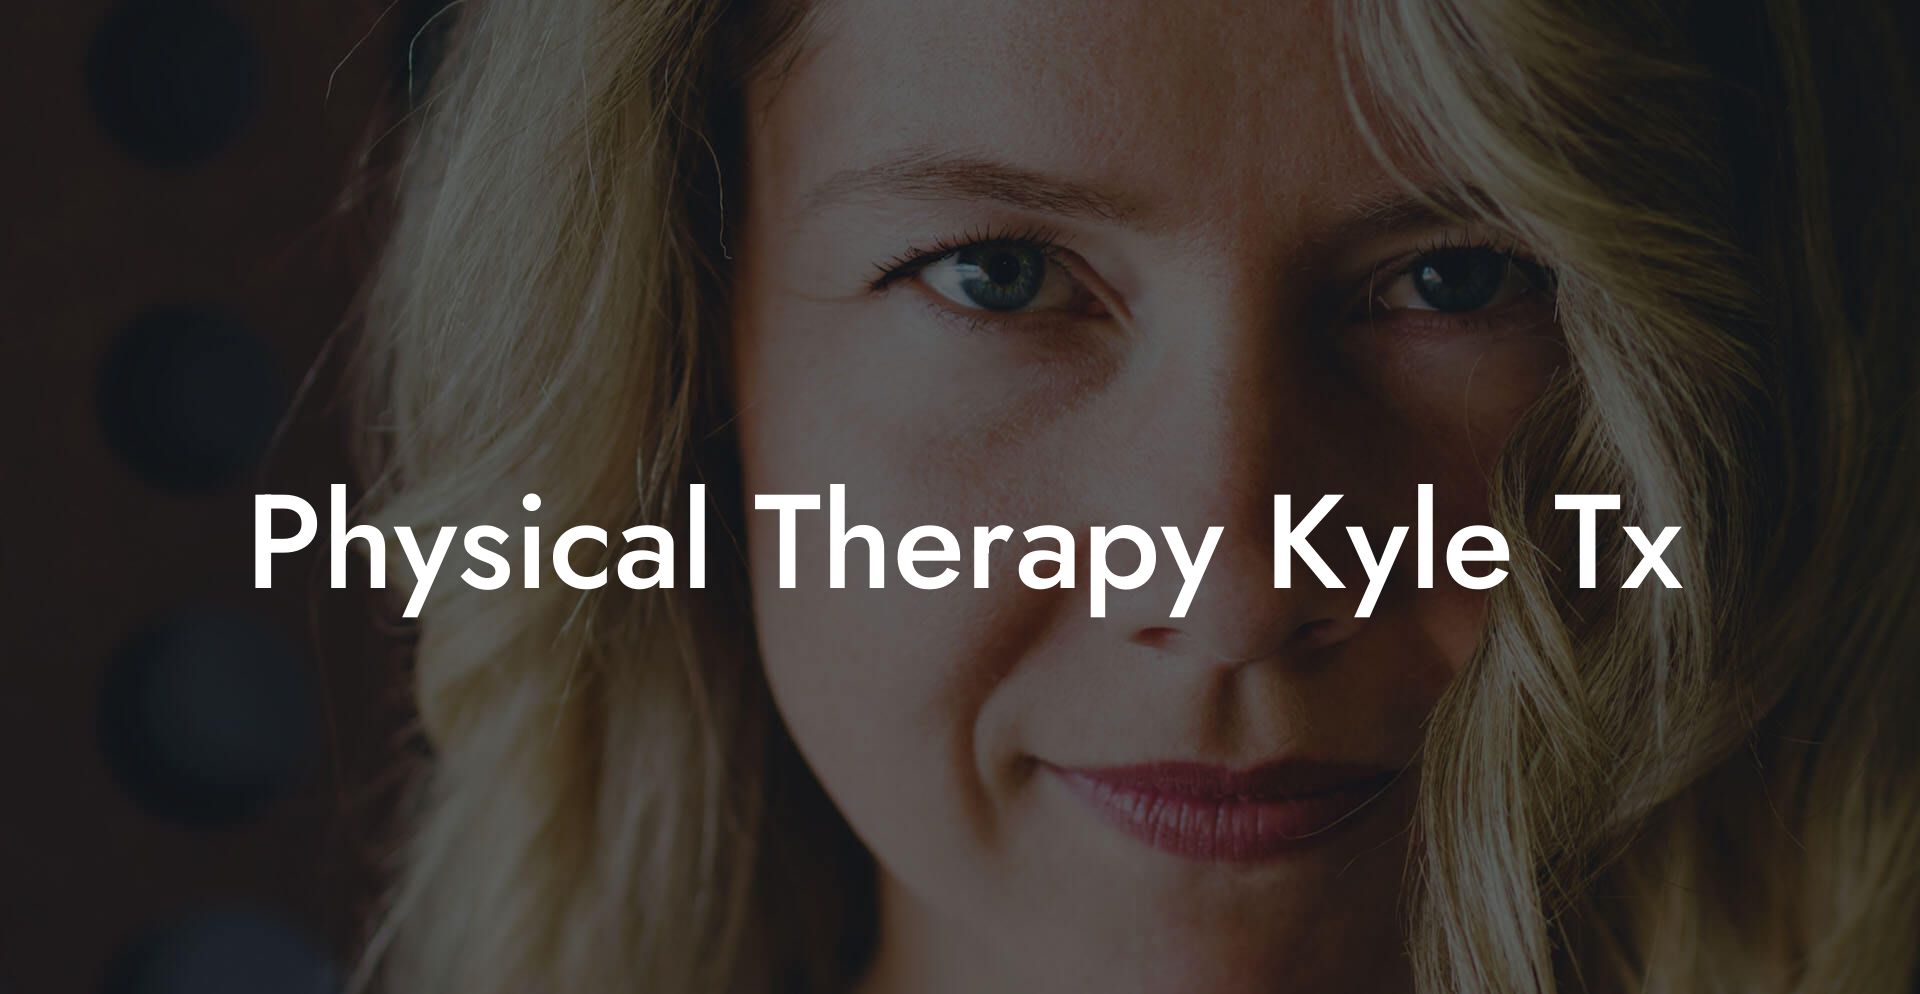 Physical Therapy Kyle Tx